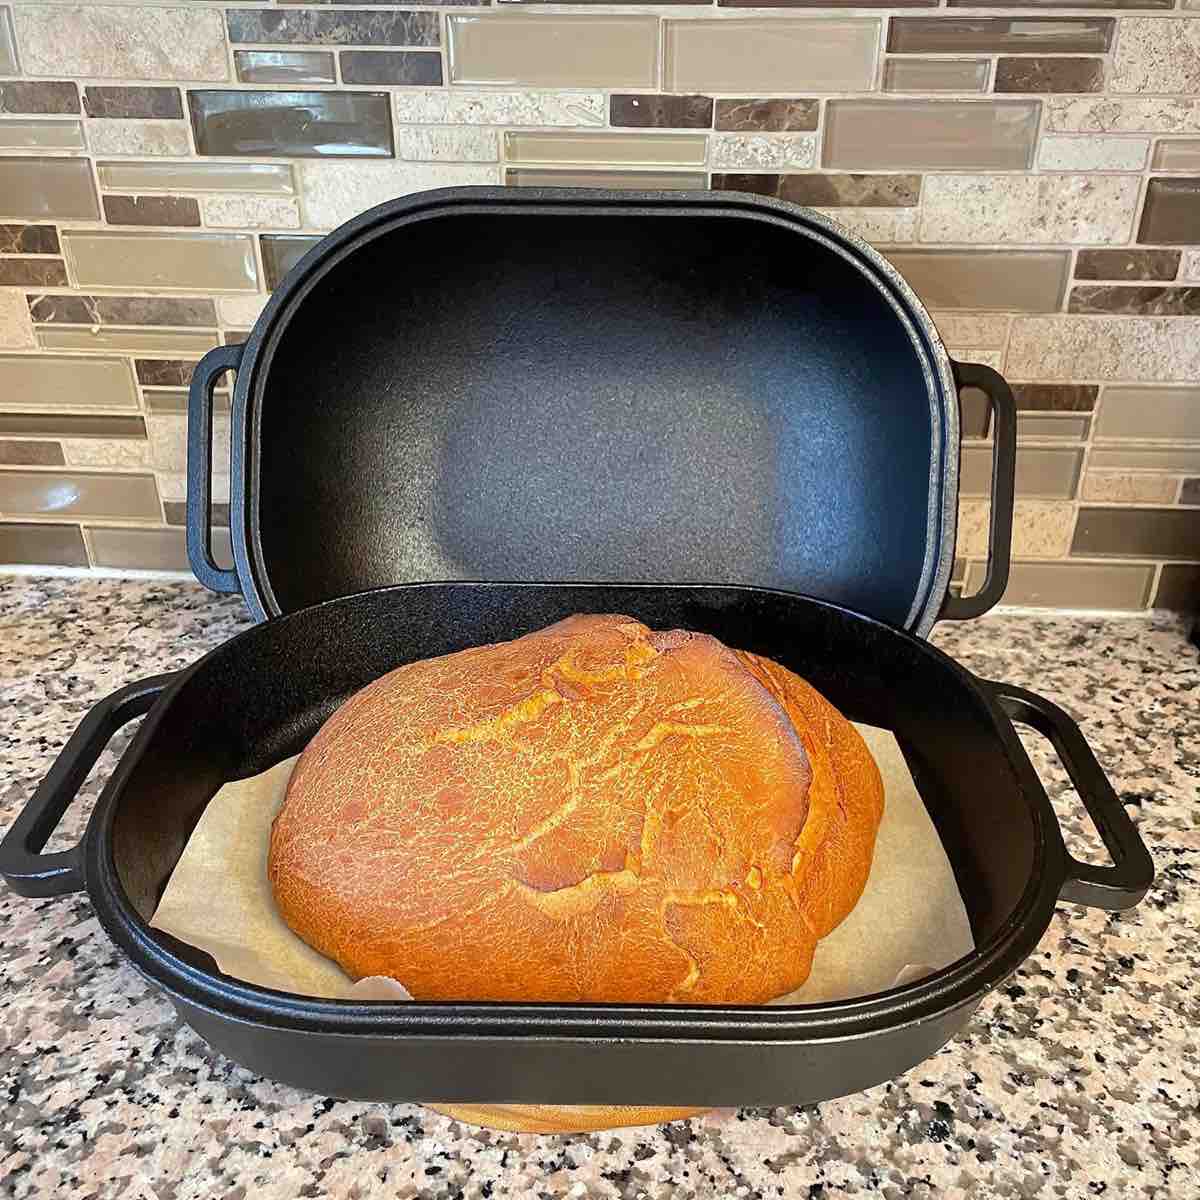 cuisiland-bbc139-cast-iron-bread-oven-loaf-pan-loaf-2